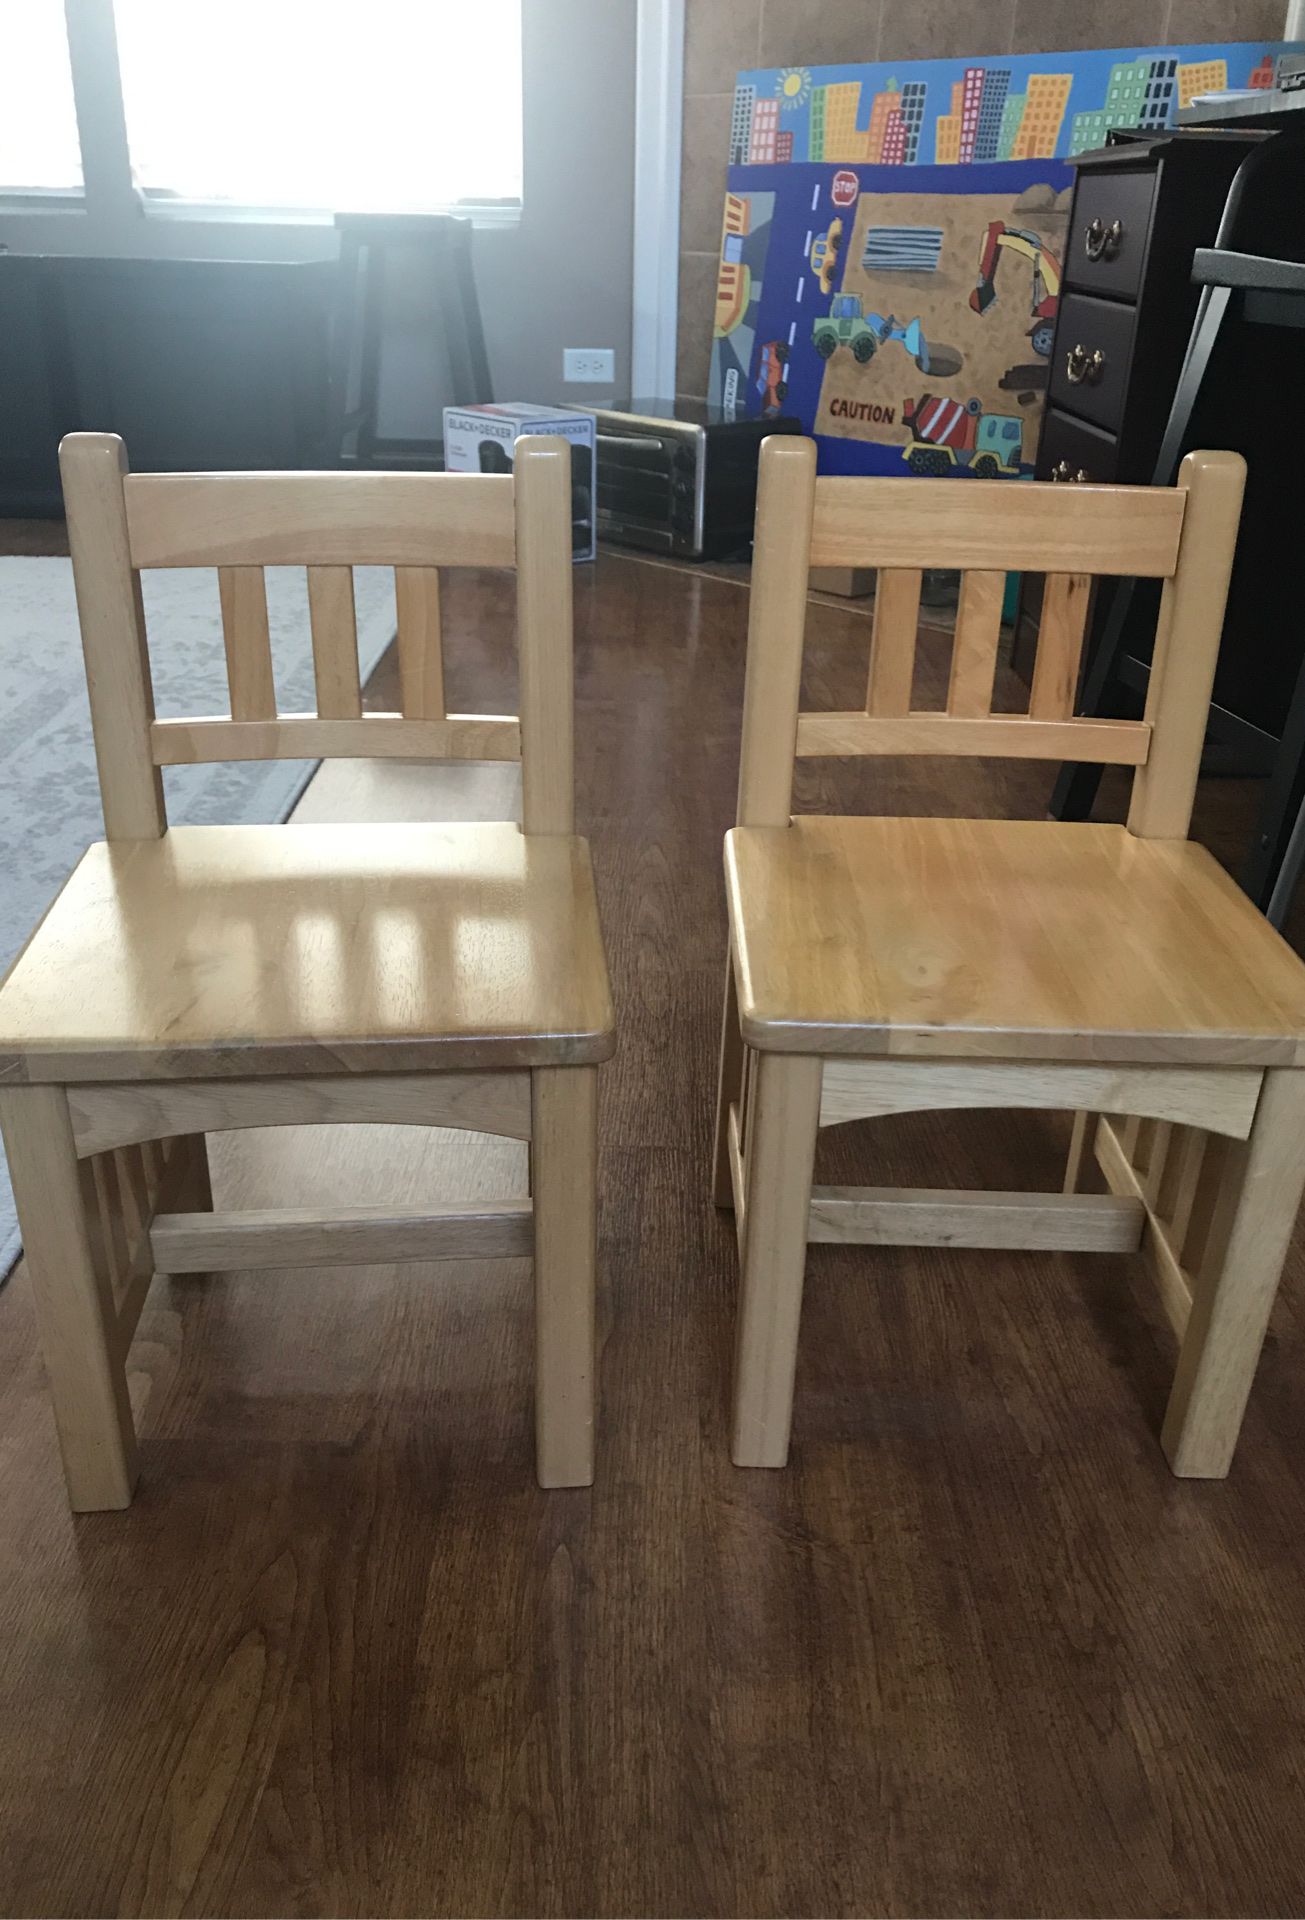 Little tikes kids chairs